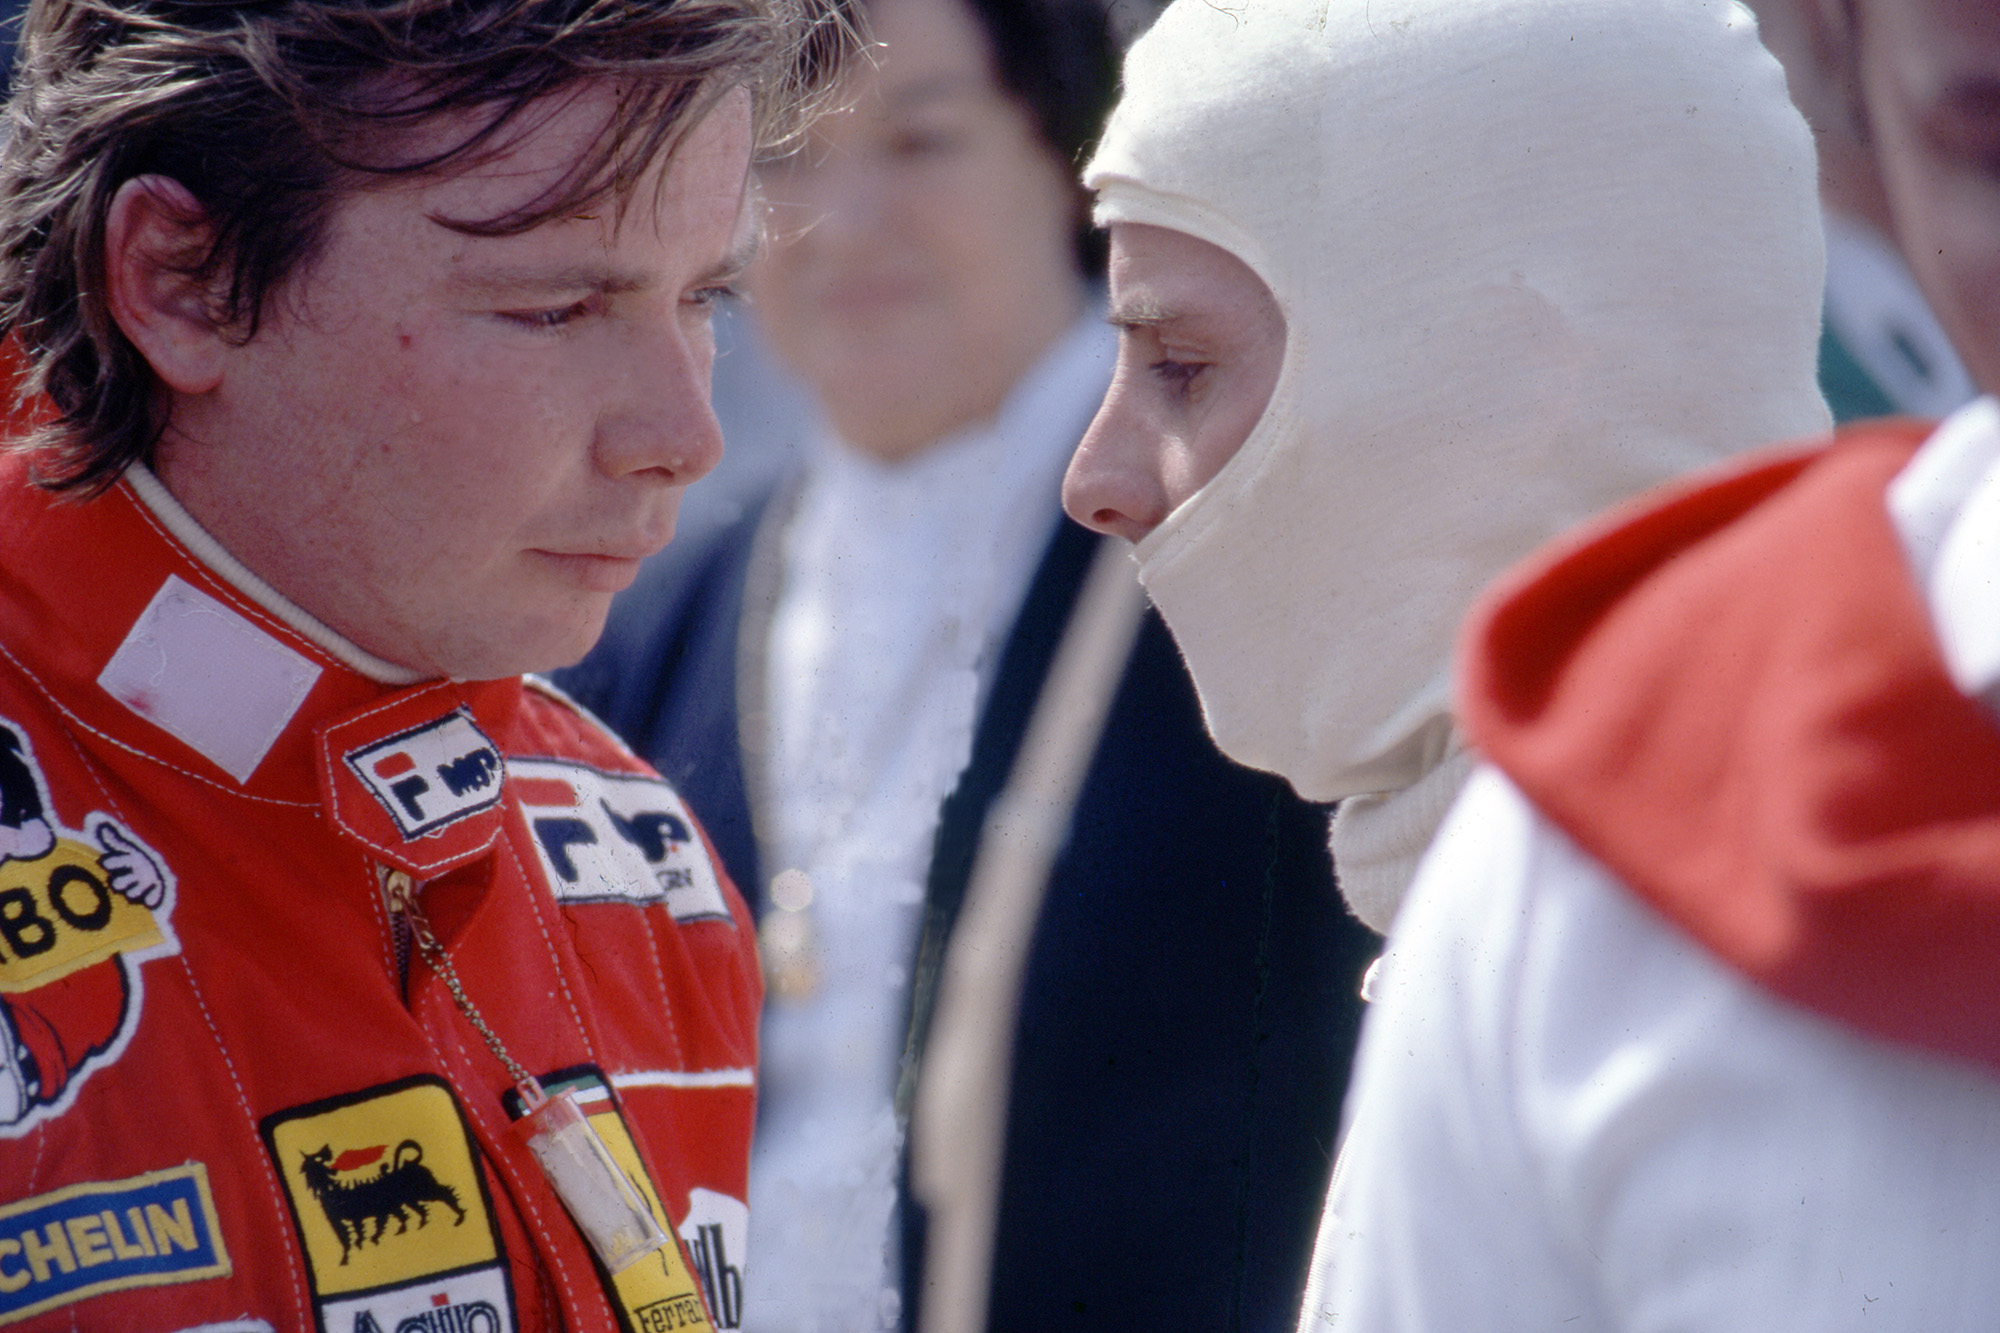 villeneuve pironi doc may shift your view of f1’s tragic feud